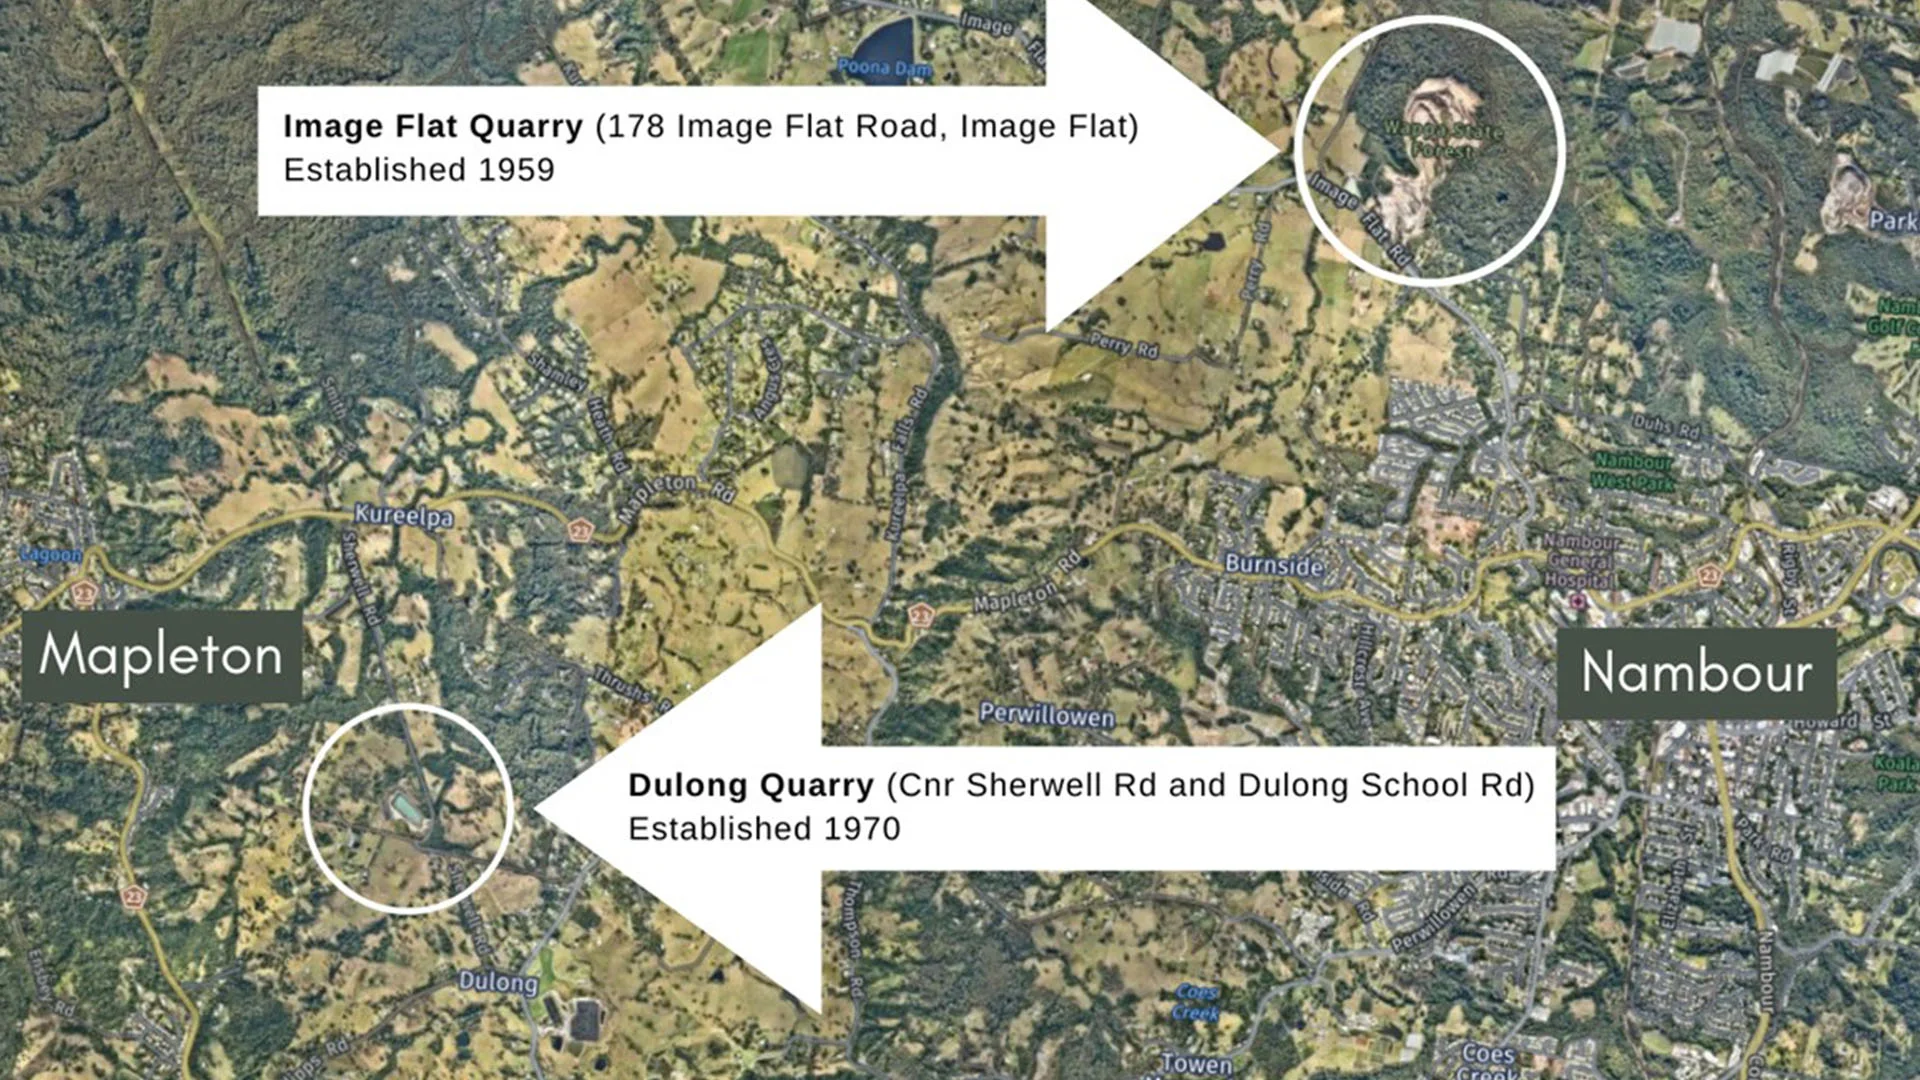 image of map with arrows pointing to the respective quarry areas.